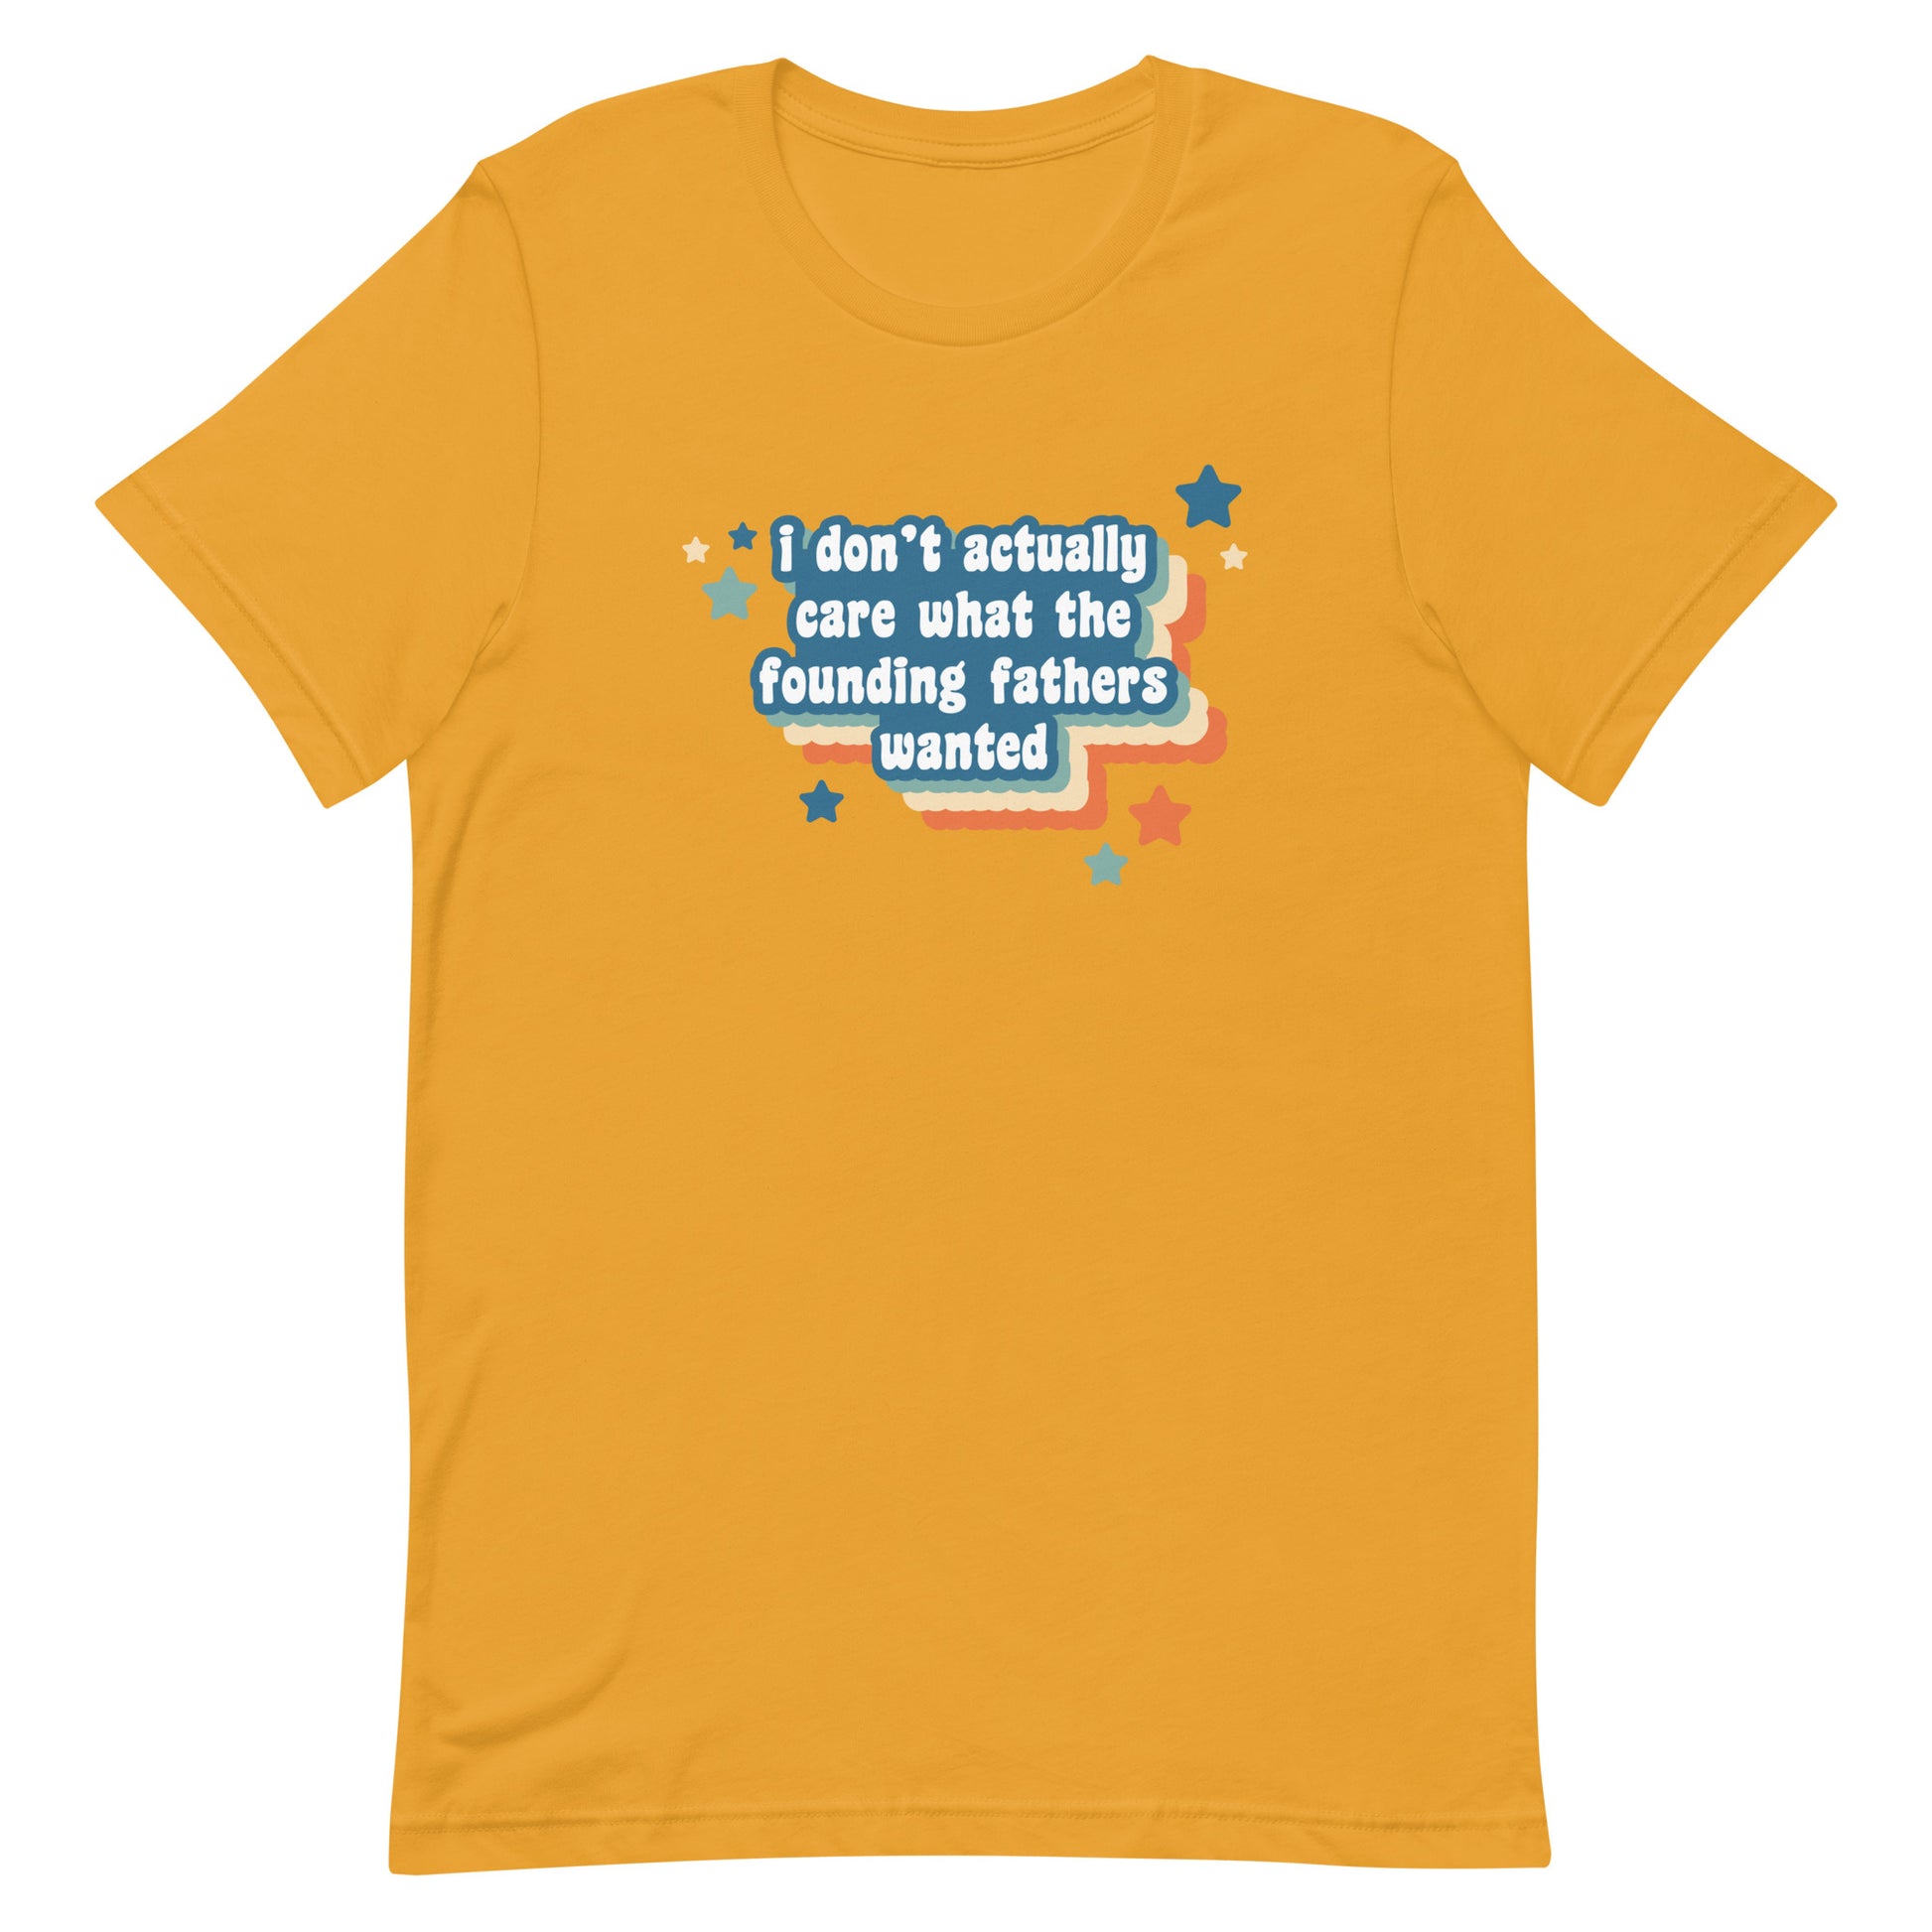 A mustard yellow crewneck t-shirt featuring text that reads "I don't actually care what the founding fathers wanted". Stars and a colorful drop shadow surround the text.